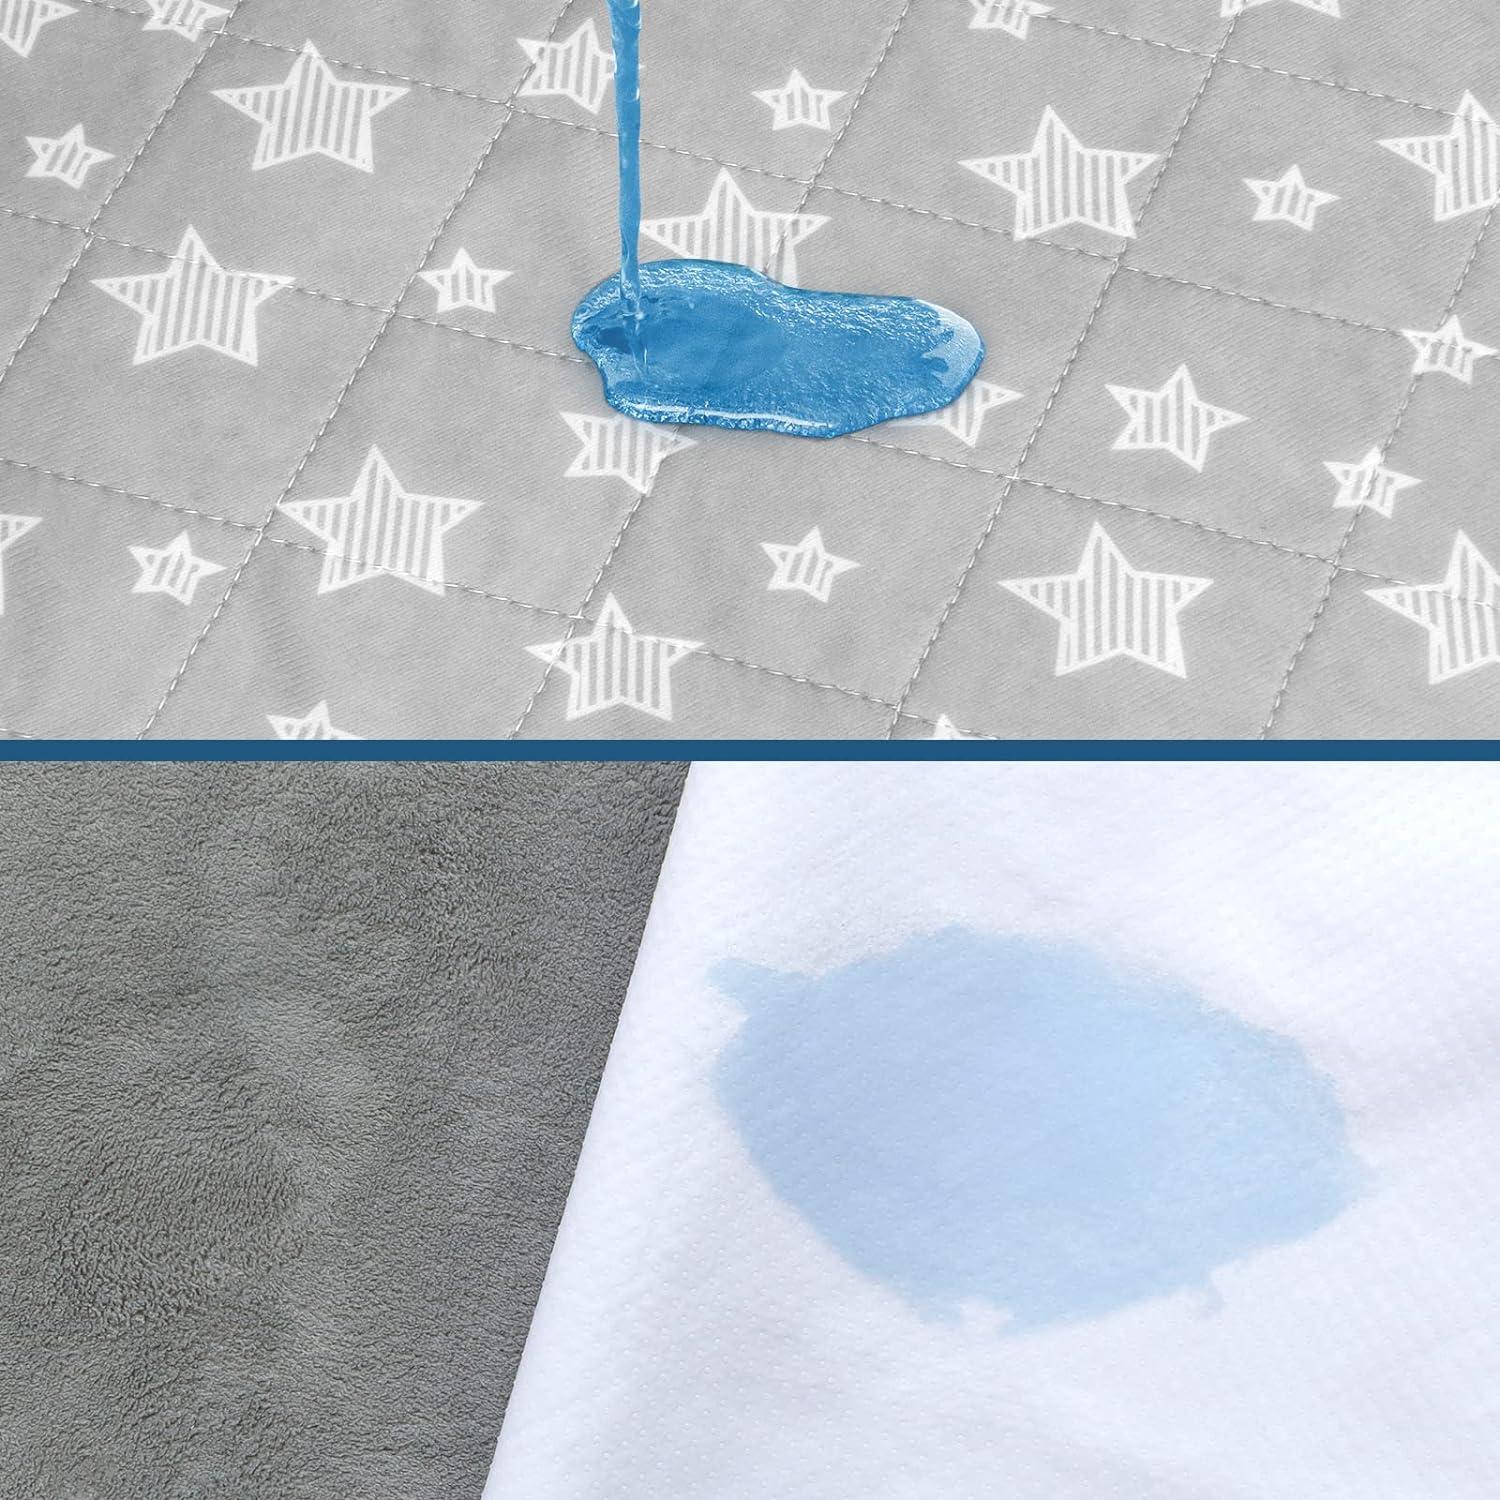 Waterproof Bed Pads 34x36 2 Pack Absorbent Pads Non Slip for Incontinence  Reusable Bed Pads Waterproof Protective Pad for Seniors Bedwetting Kids  Hospitals Pets Gray Star 34x36 (2 Pack)